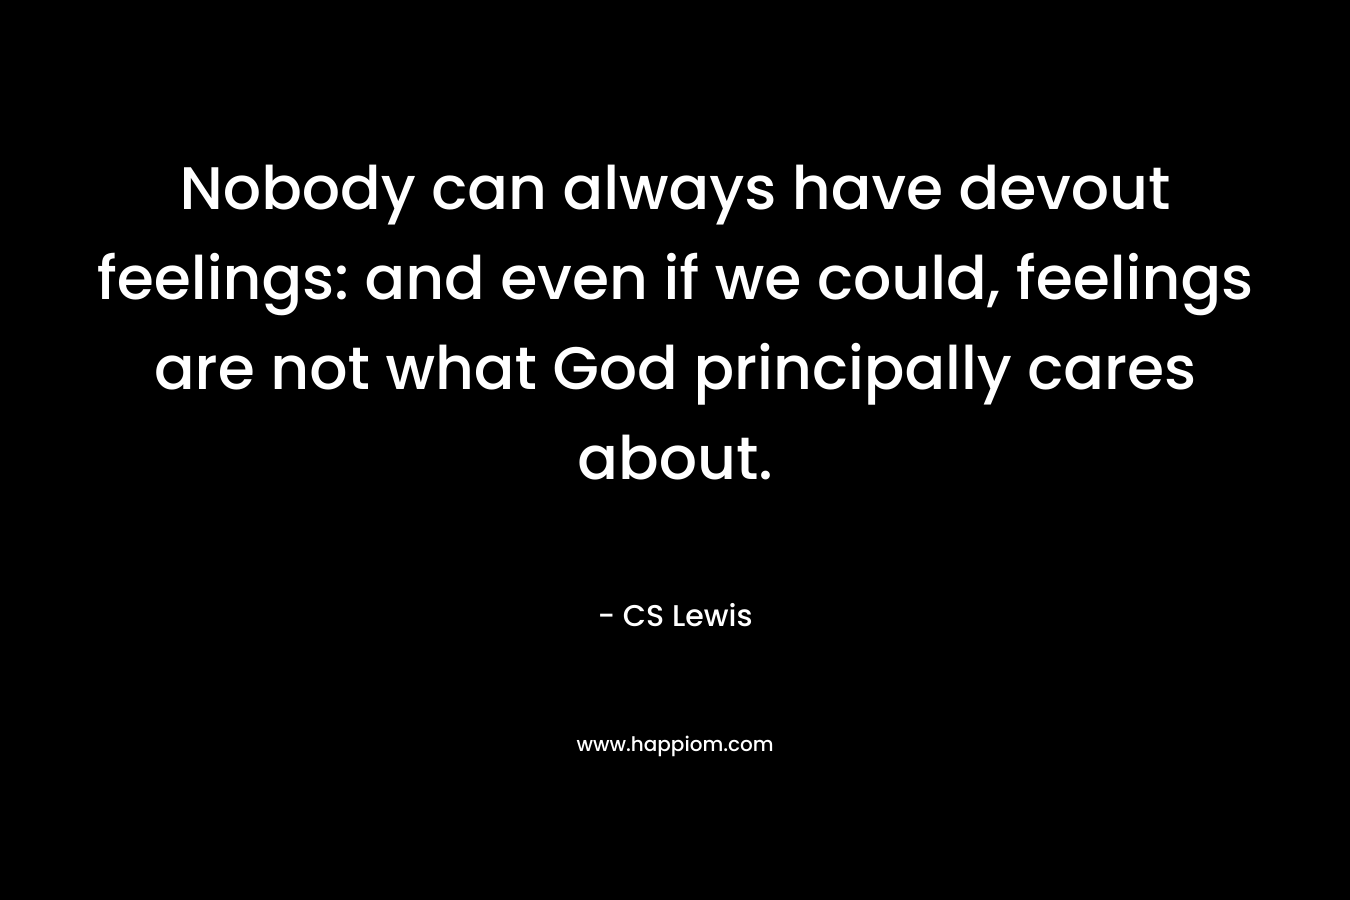 Nobody can always have devout feelings: and even if we could, feelings are not what God principally cares about. – CS Lewis